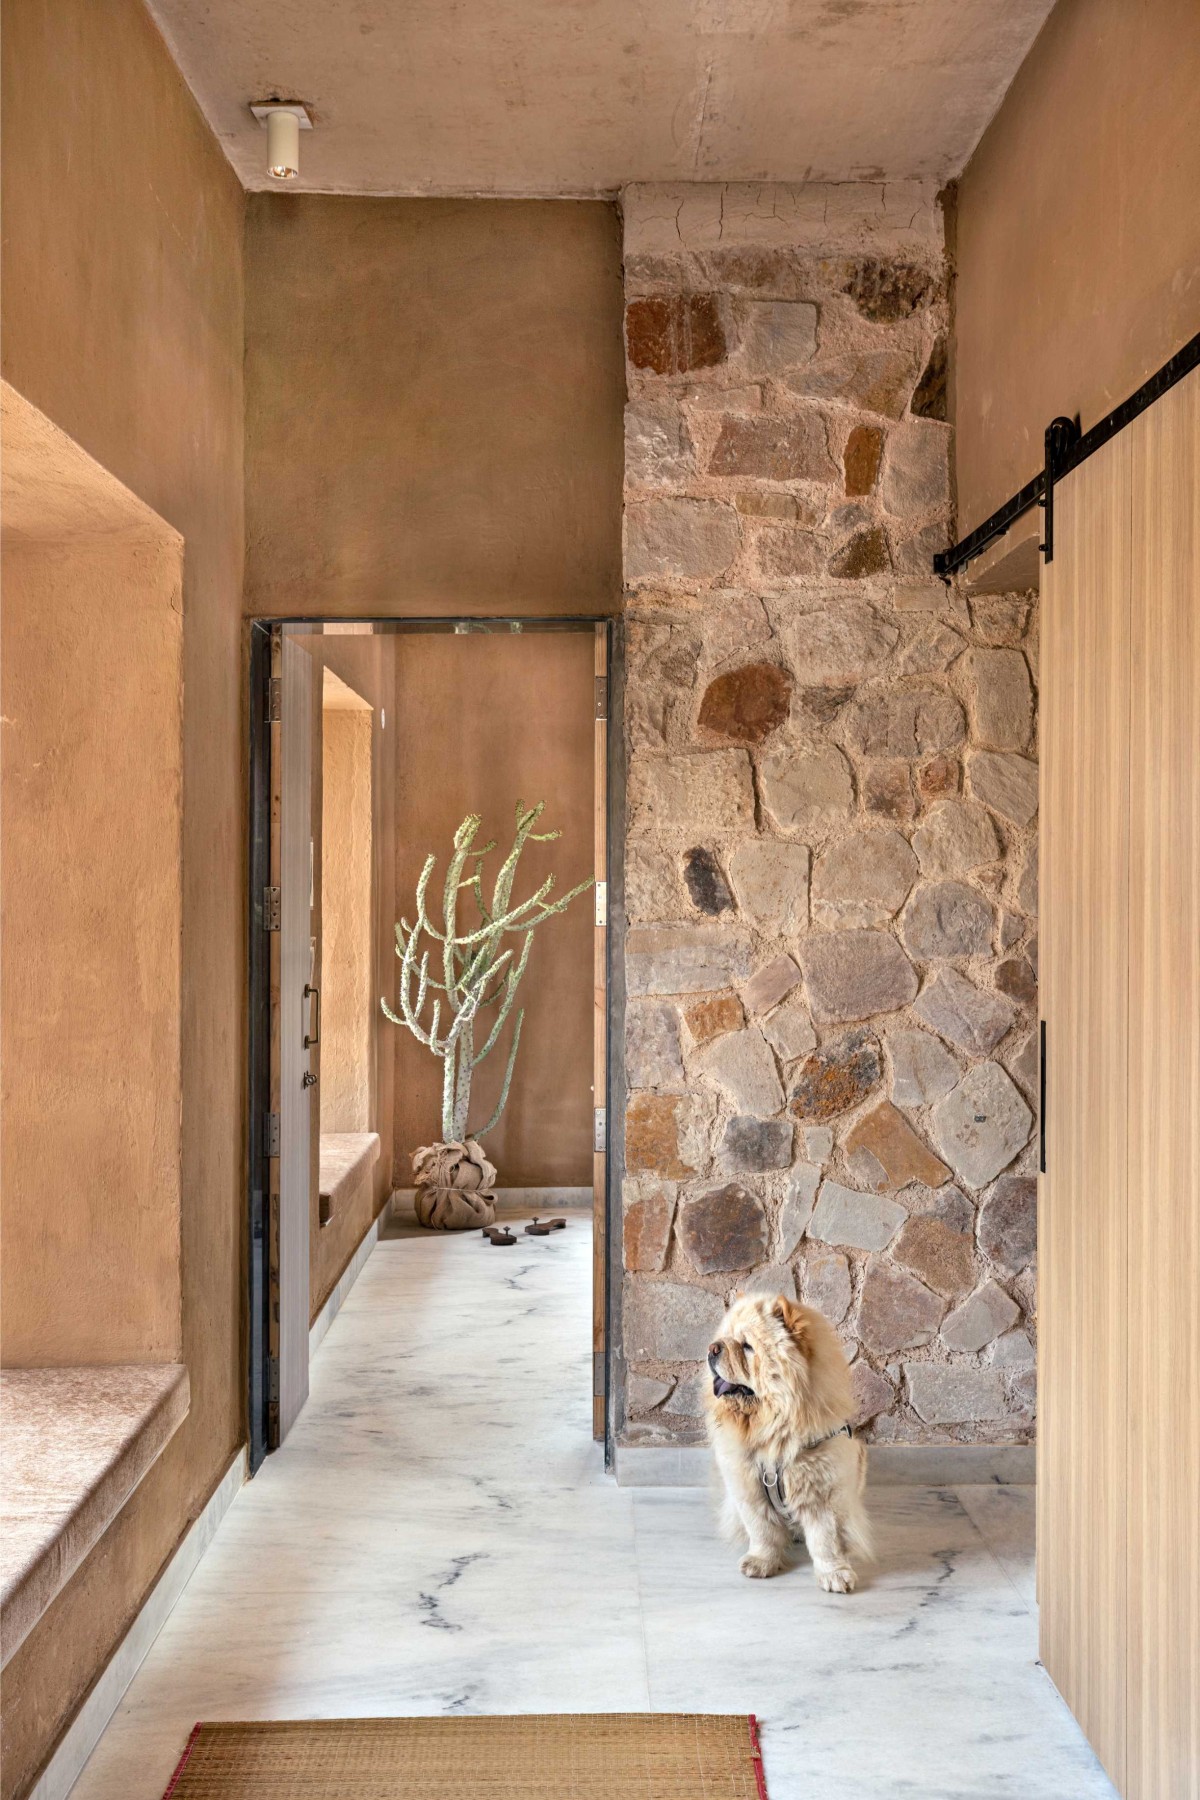 Passage of Stone House by Sketch Design Studio